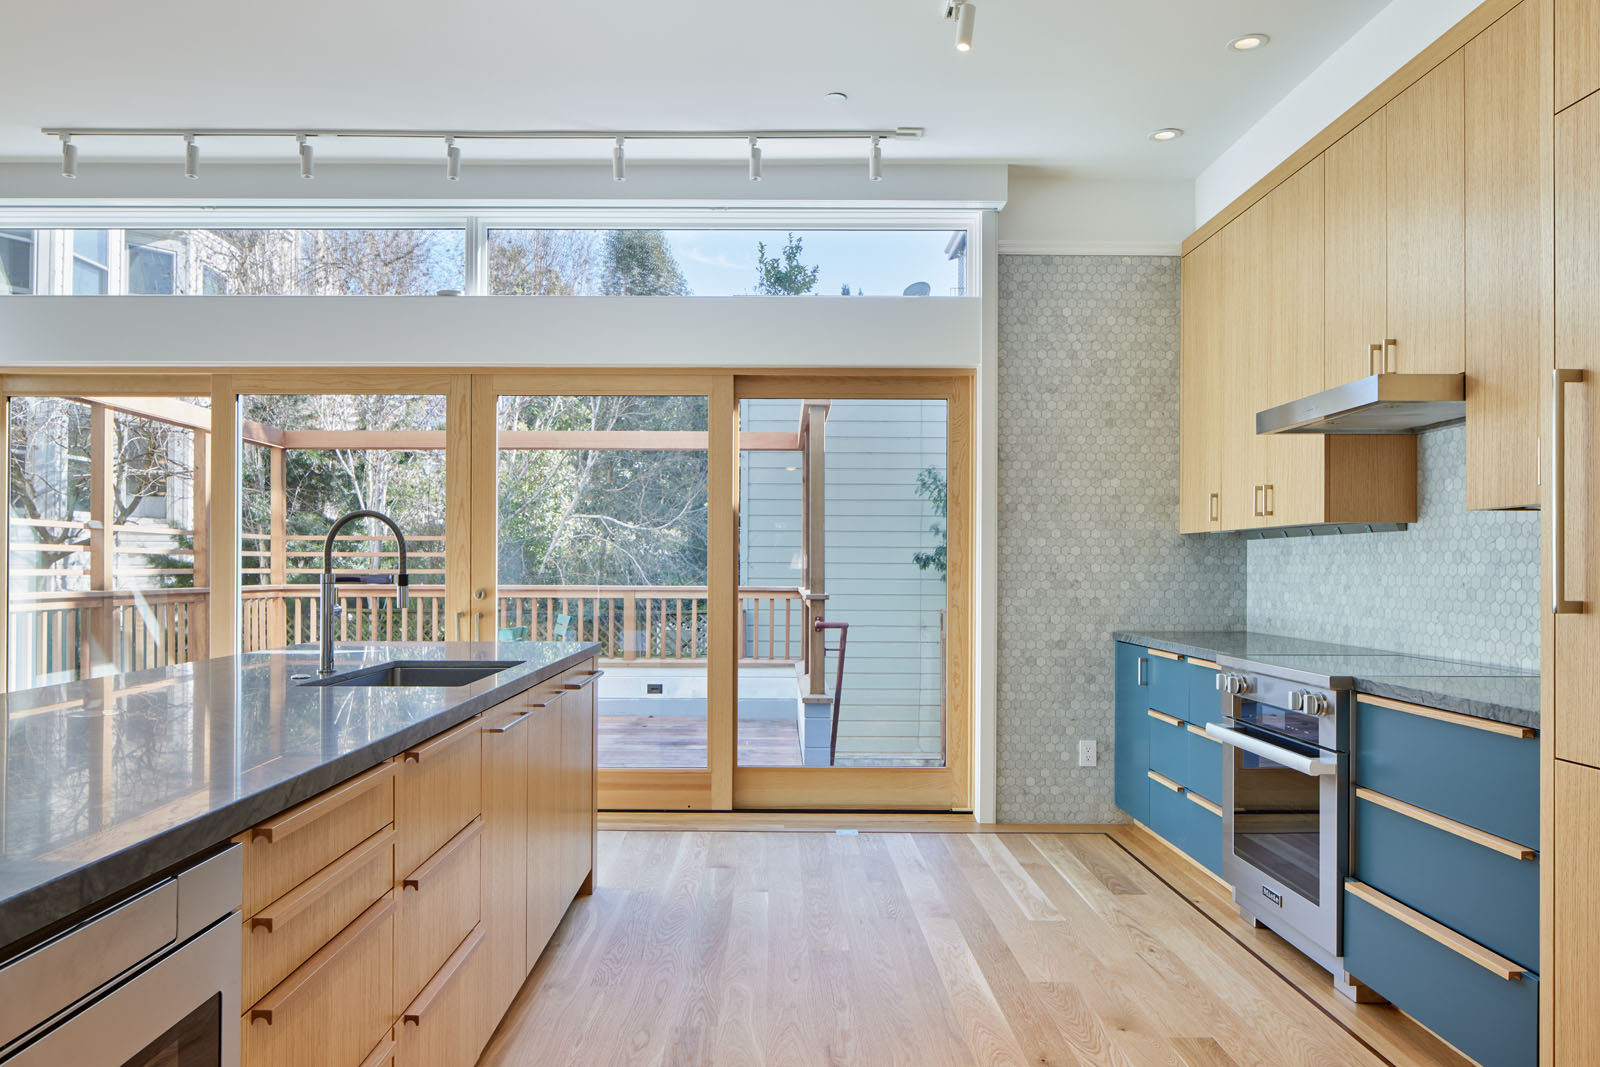 The kitchen was opened up with a new south facing sliding door to let in views and light and connect to the outside.